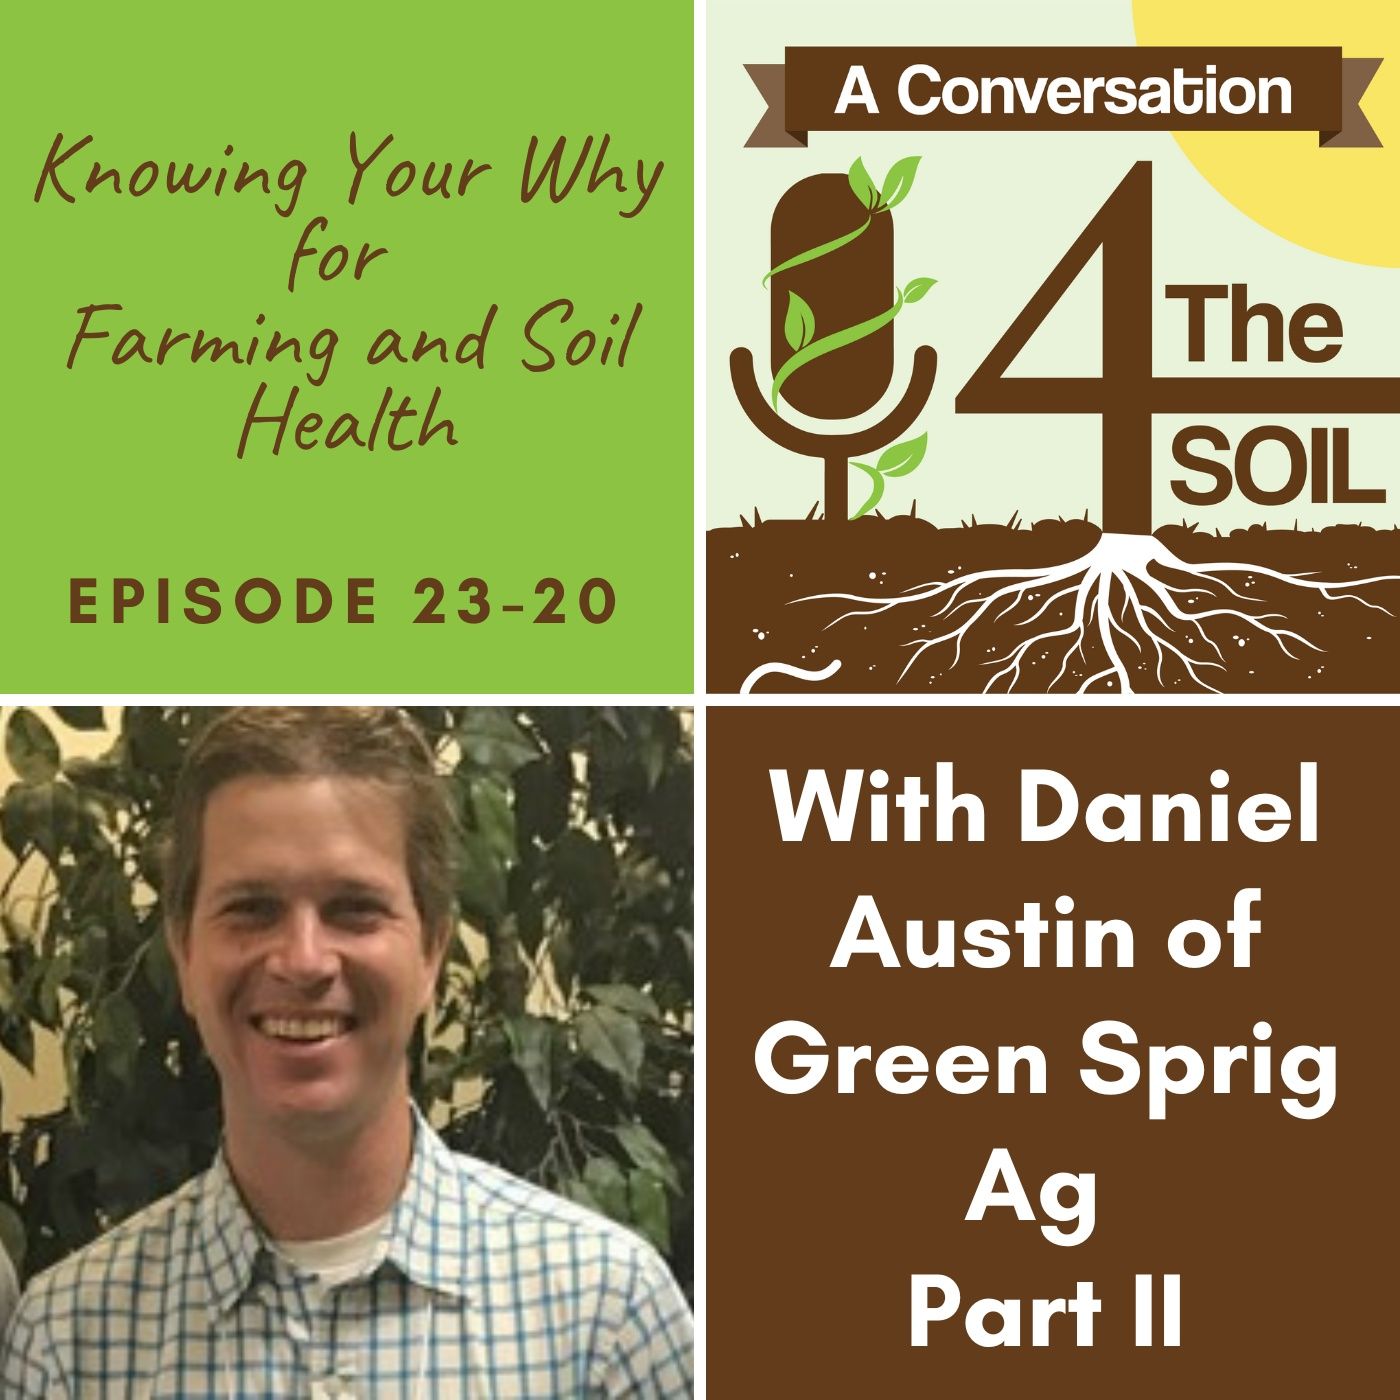 Episode 23 - 20: Knowing Your Why for Farming and Soil Health with Daniel Austin of Green Sprig Ag Part II